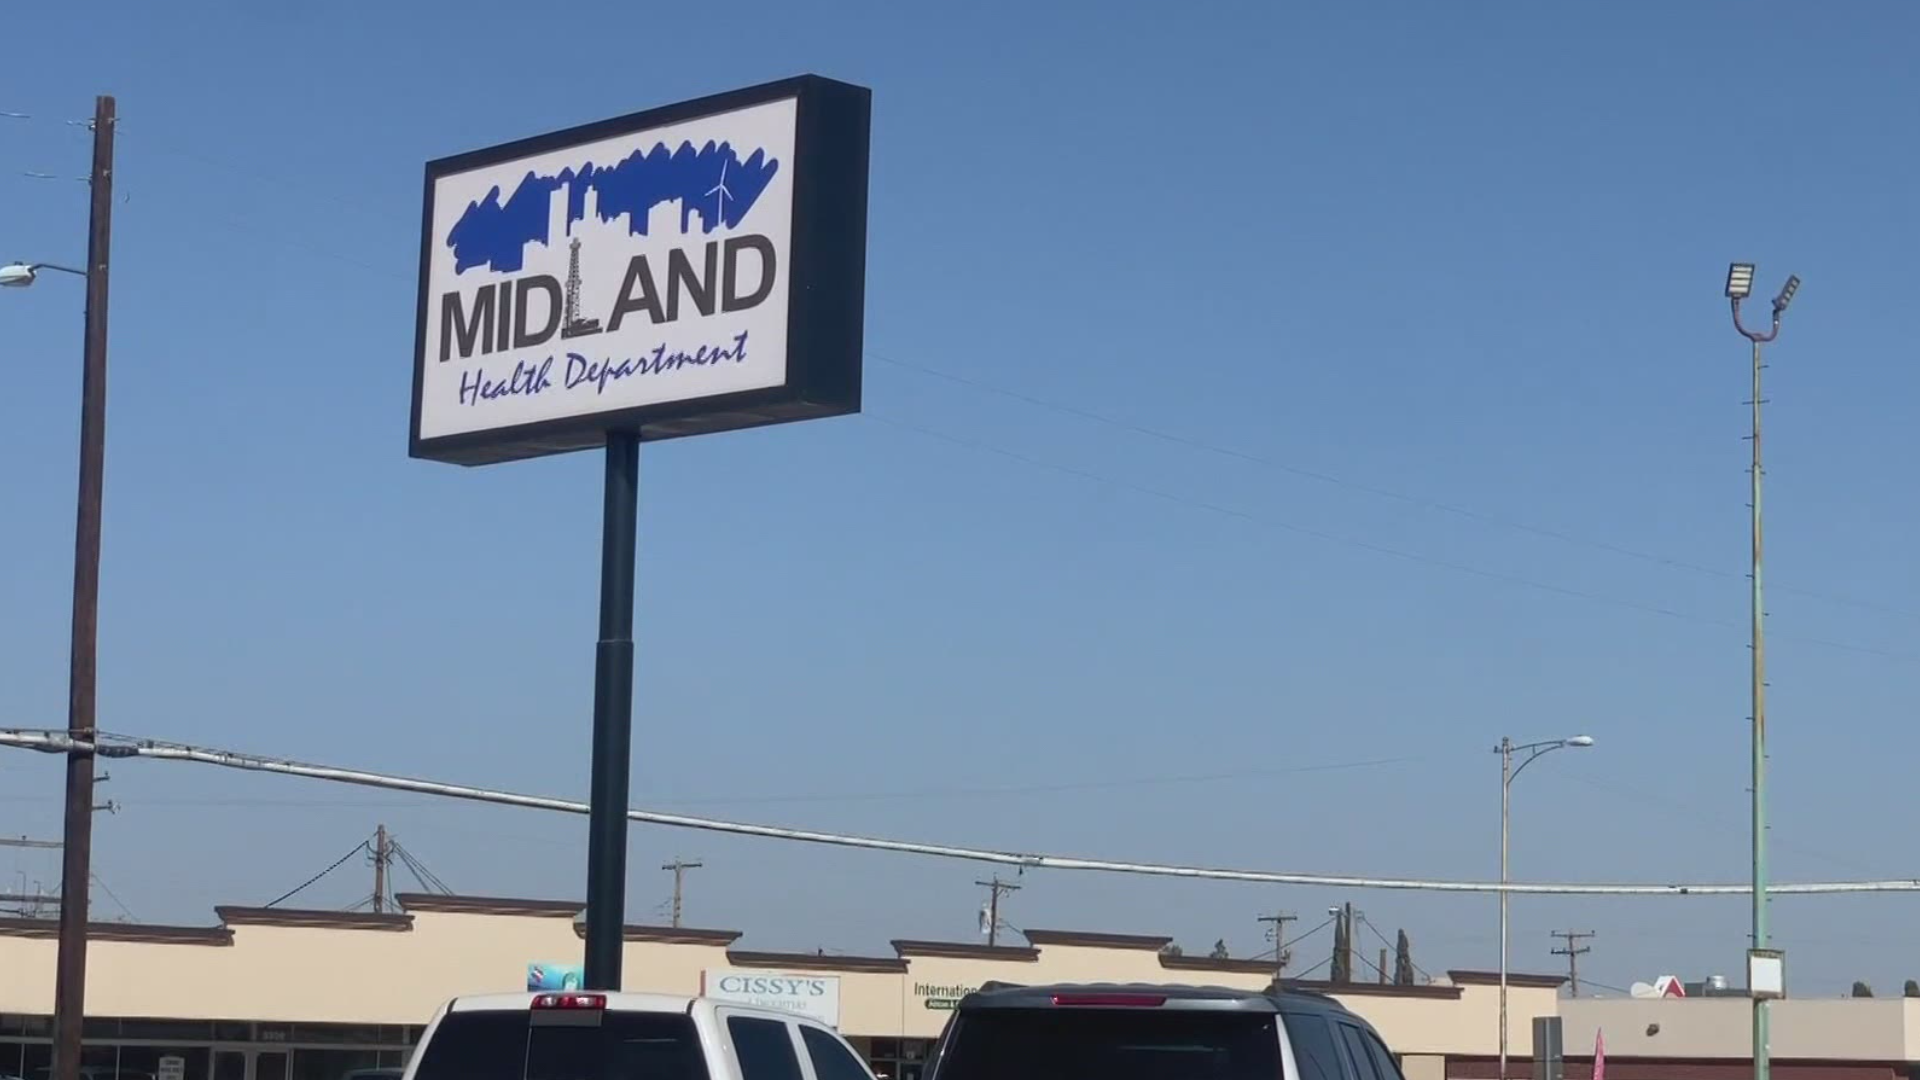 The Midland Health Department received 200 doses of the Moderna vaccine Tuesday night.